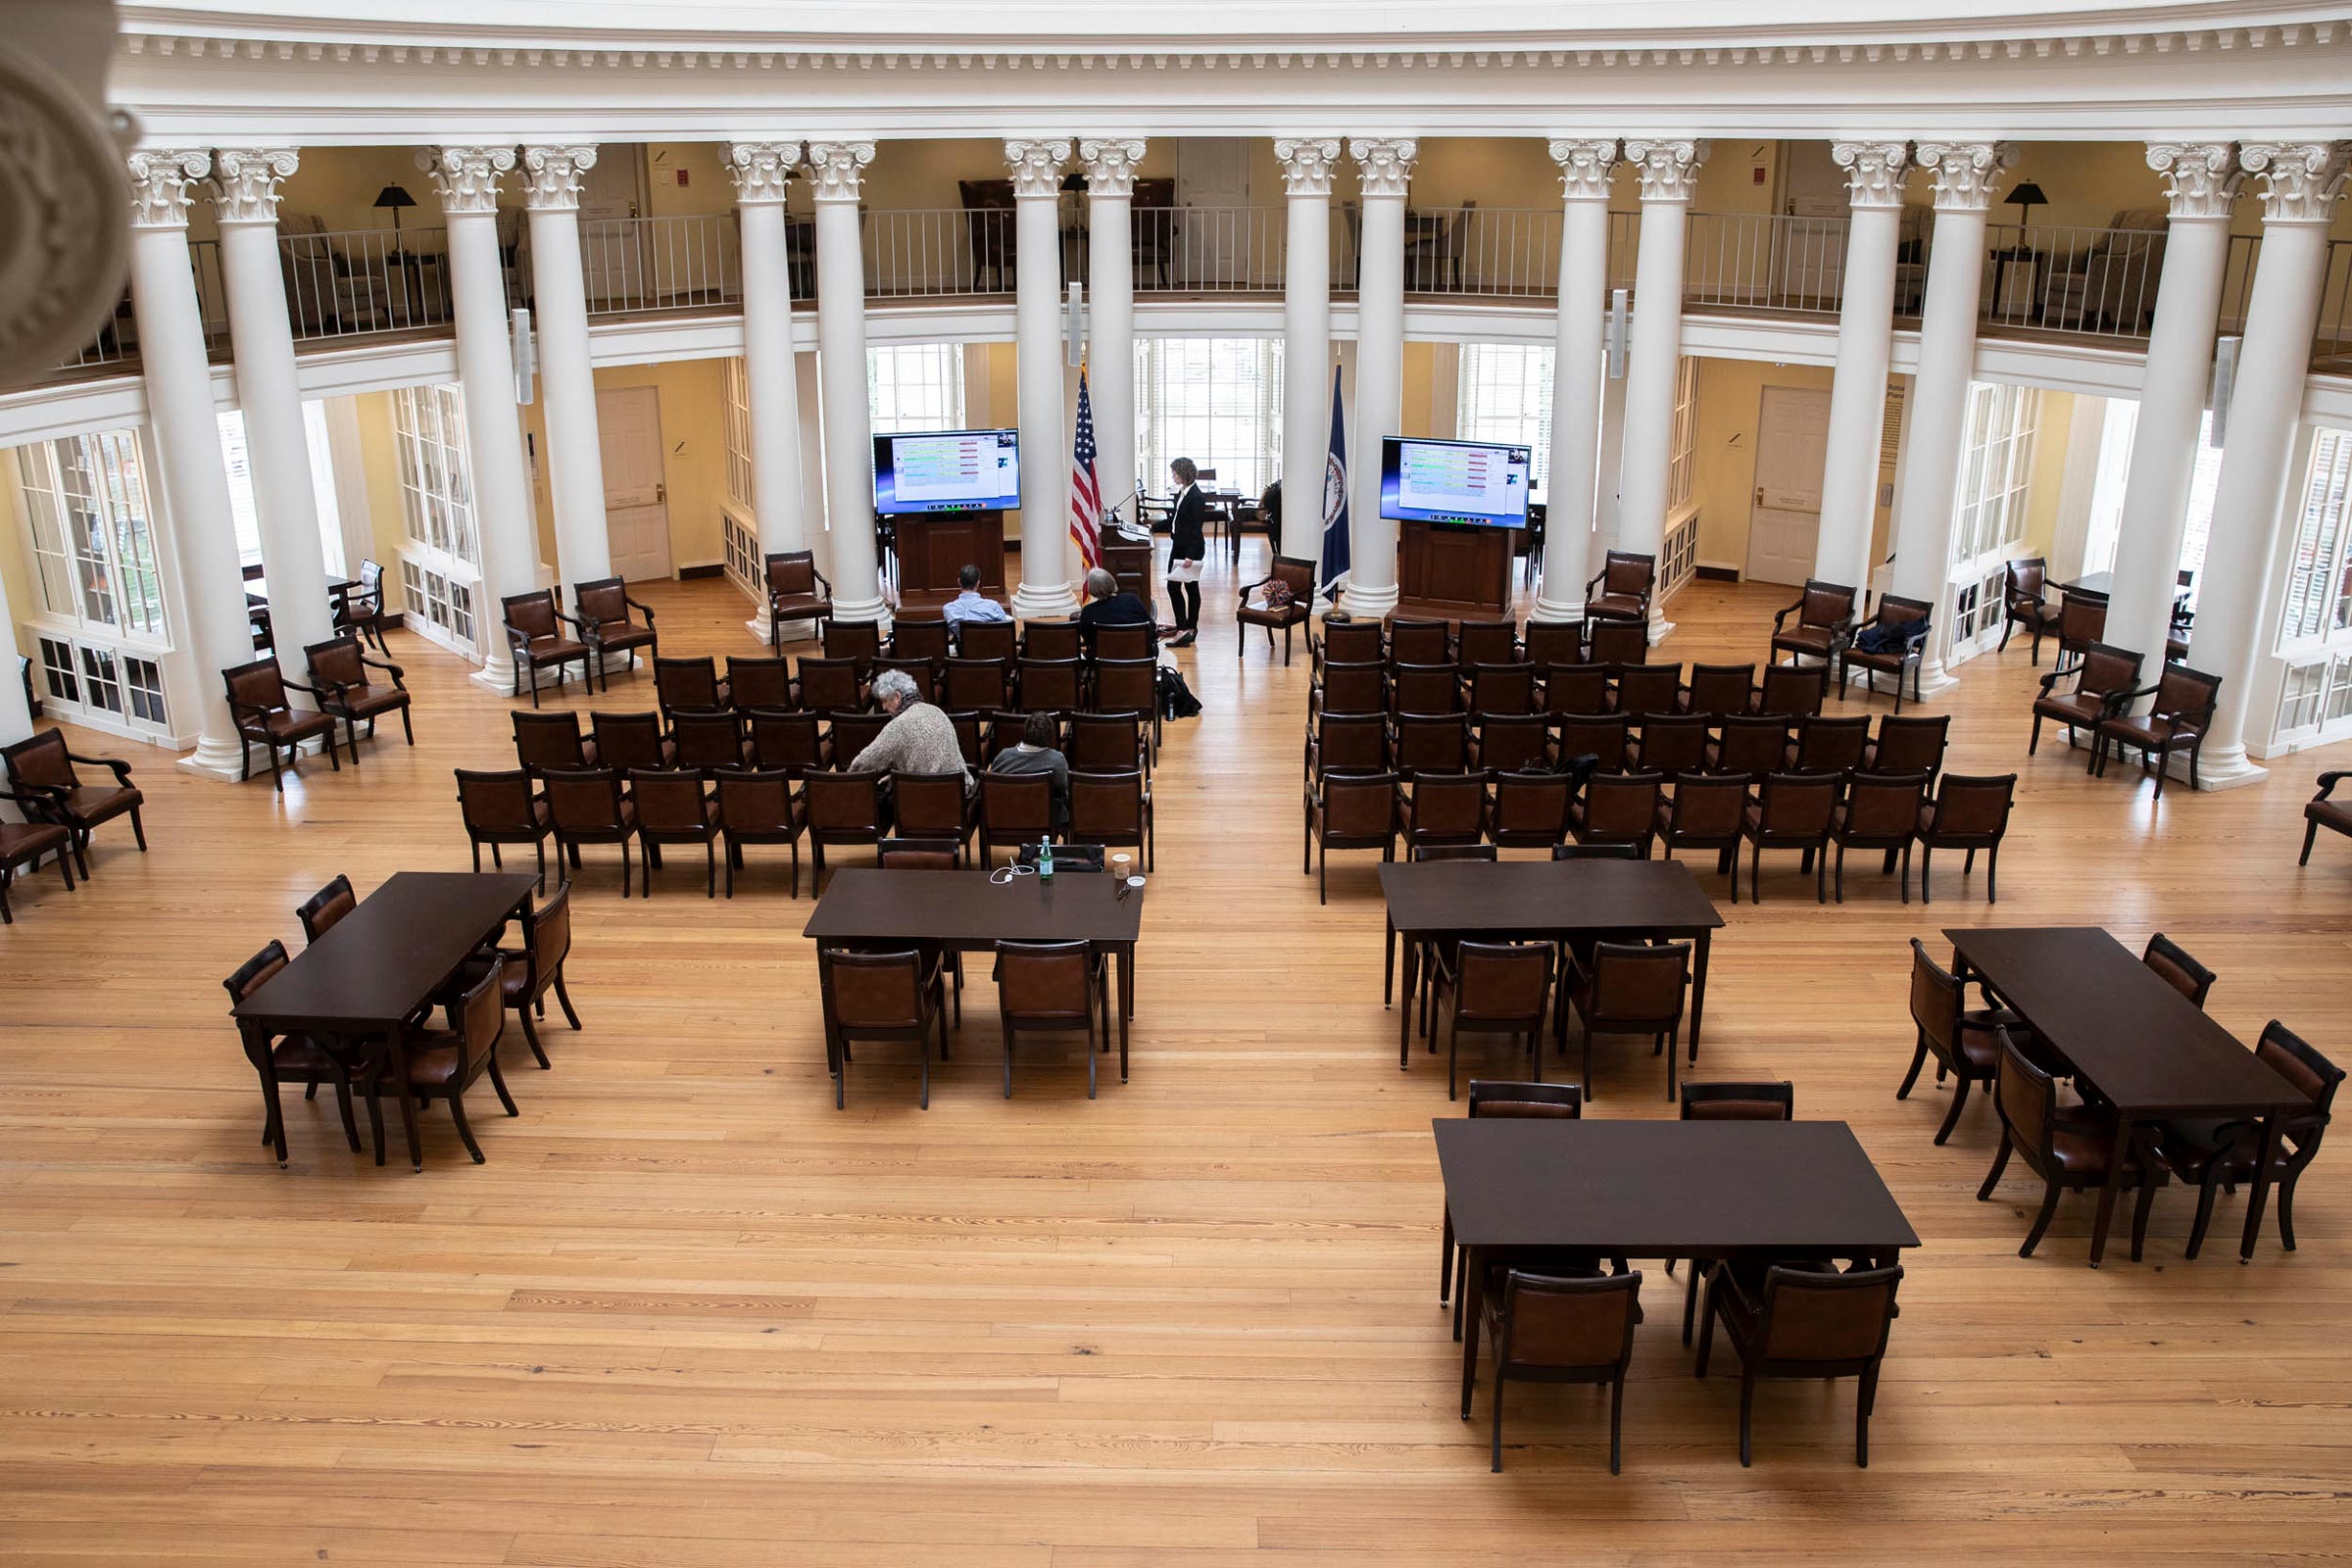 The Rotunda mostly empty with chairs and screens set up in preparation of a speech